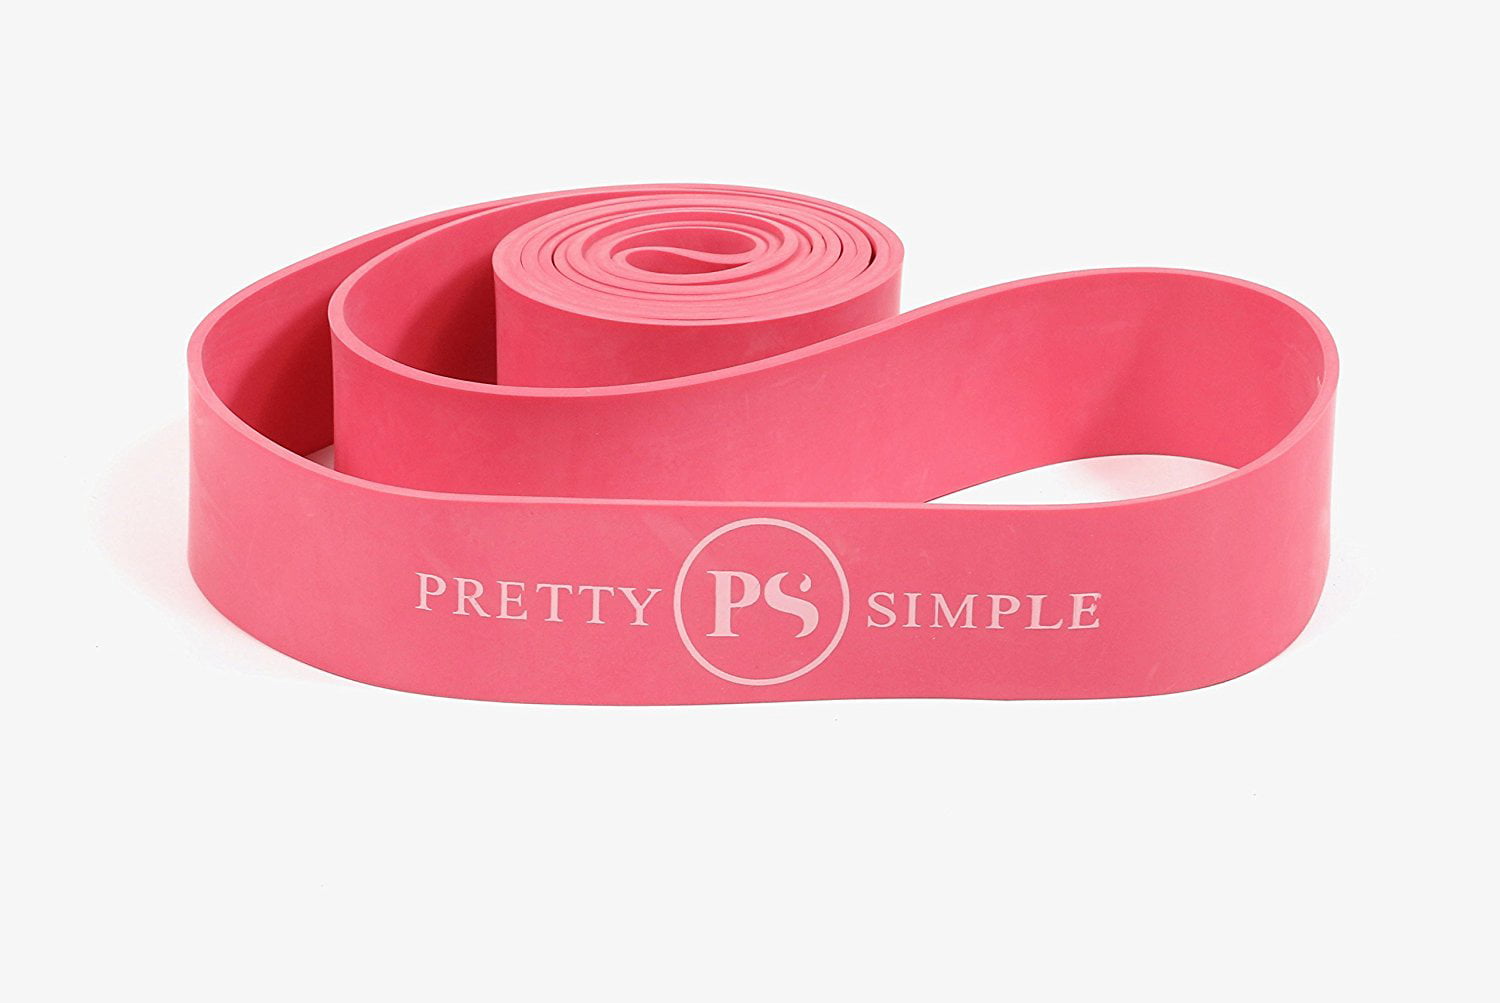 Pretty Simple Premium Ballet Band, Exercise Stretch Band